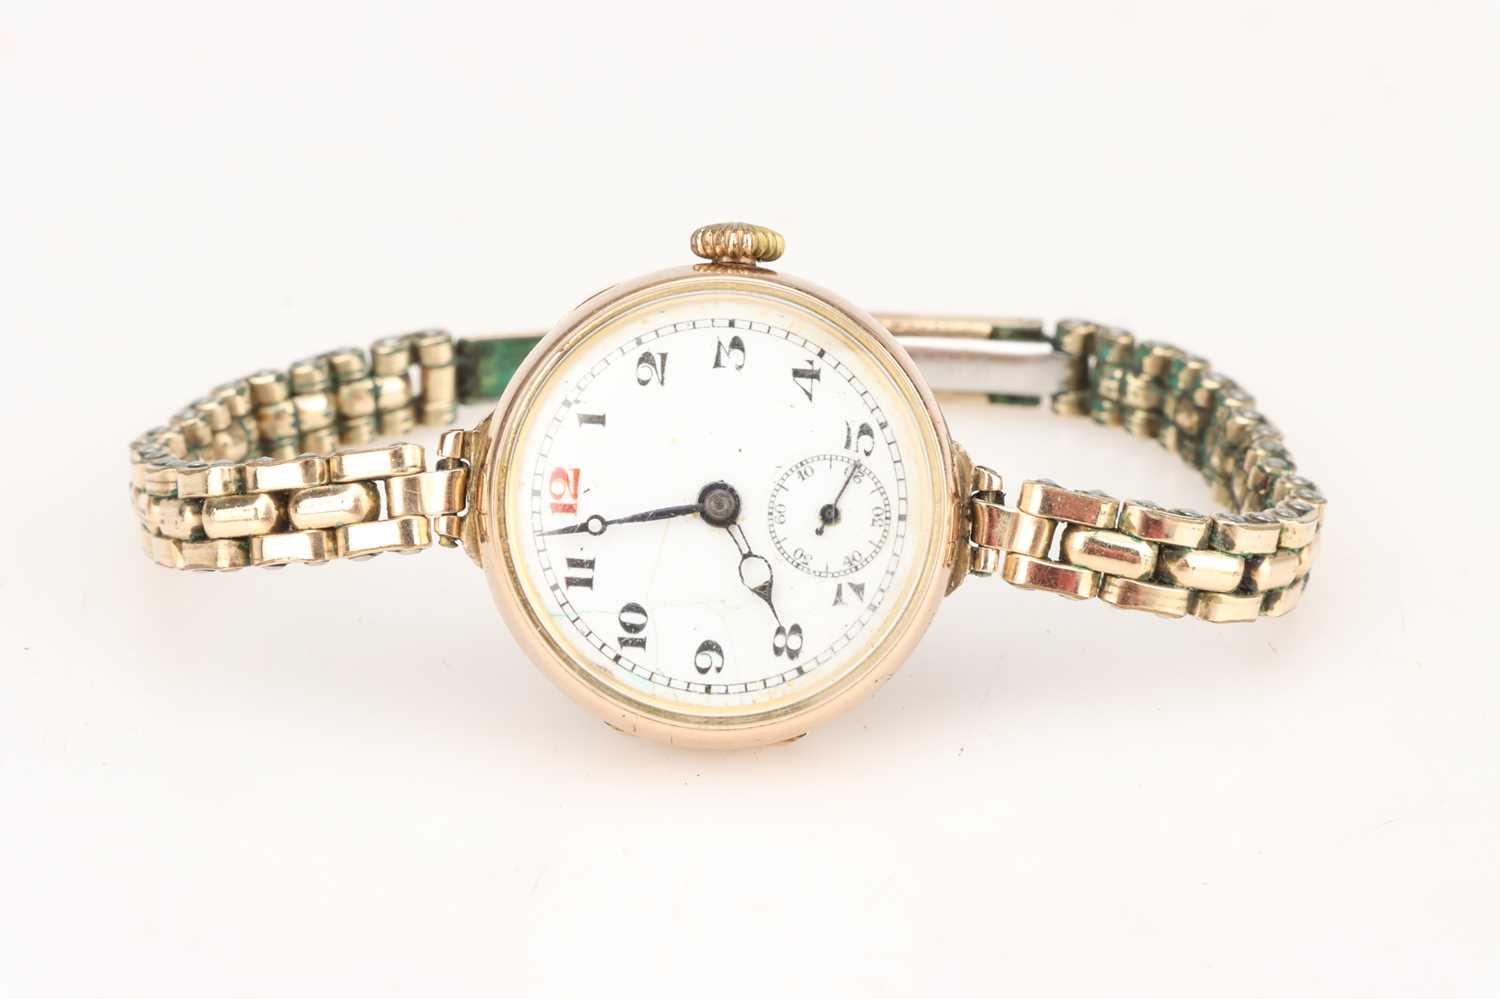 Lot 105 - A 9 ct Gold Cased Trench Style Watch